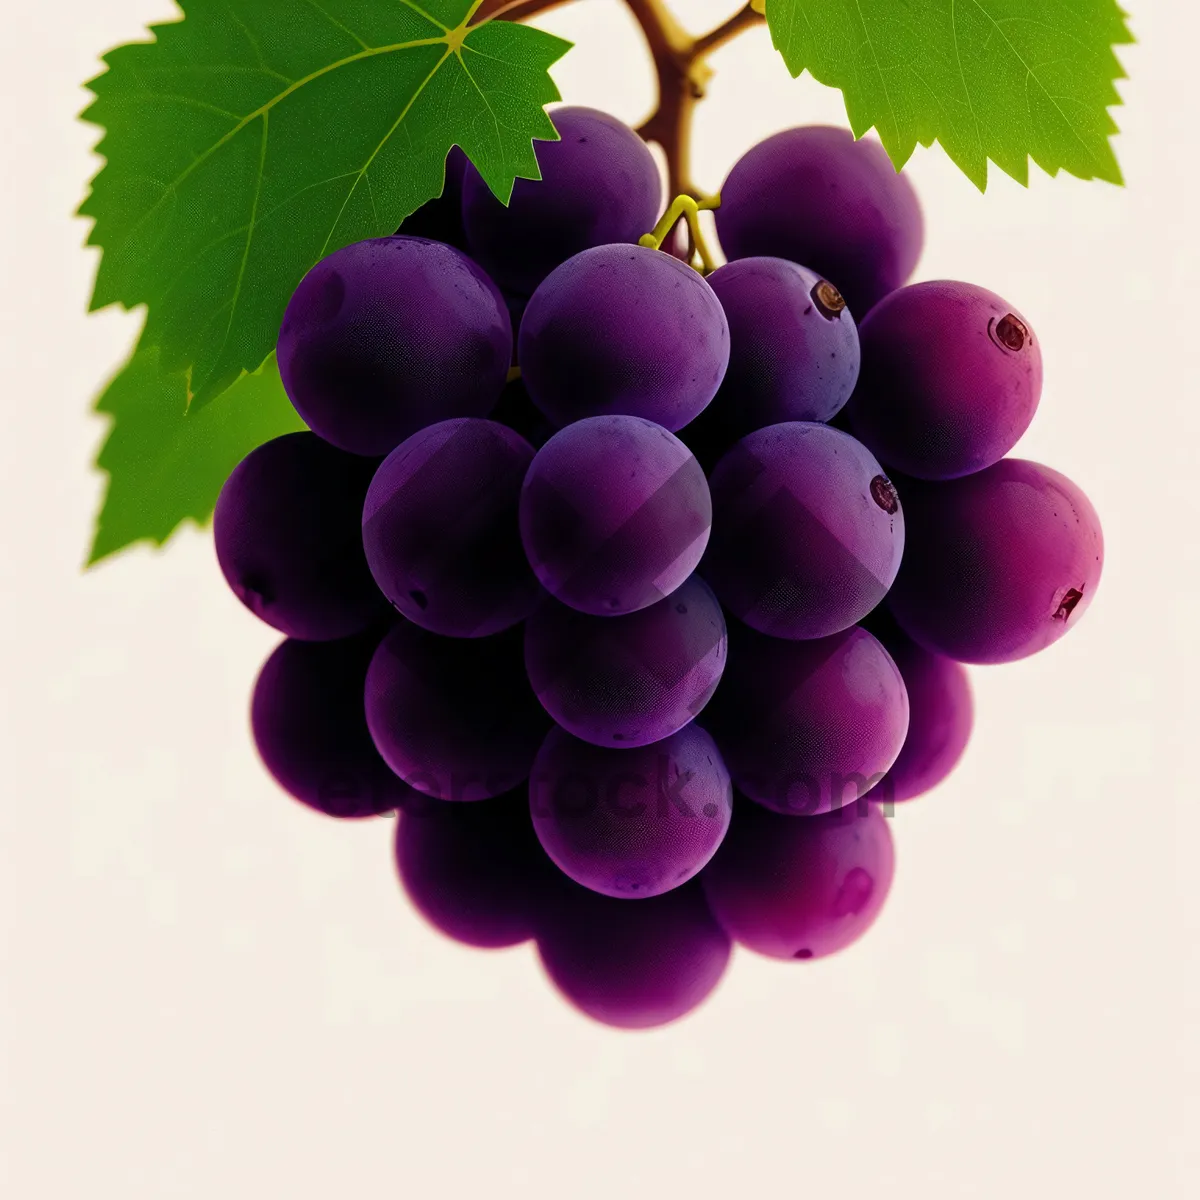 Picture of Ripe Juicy Grapes on Vine in Vineyard